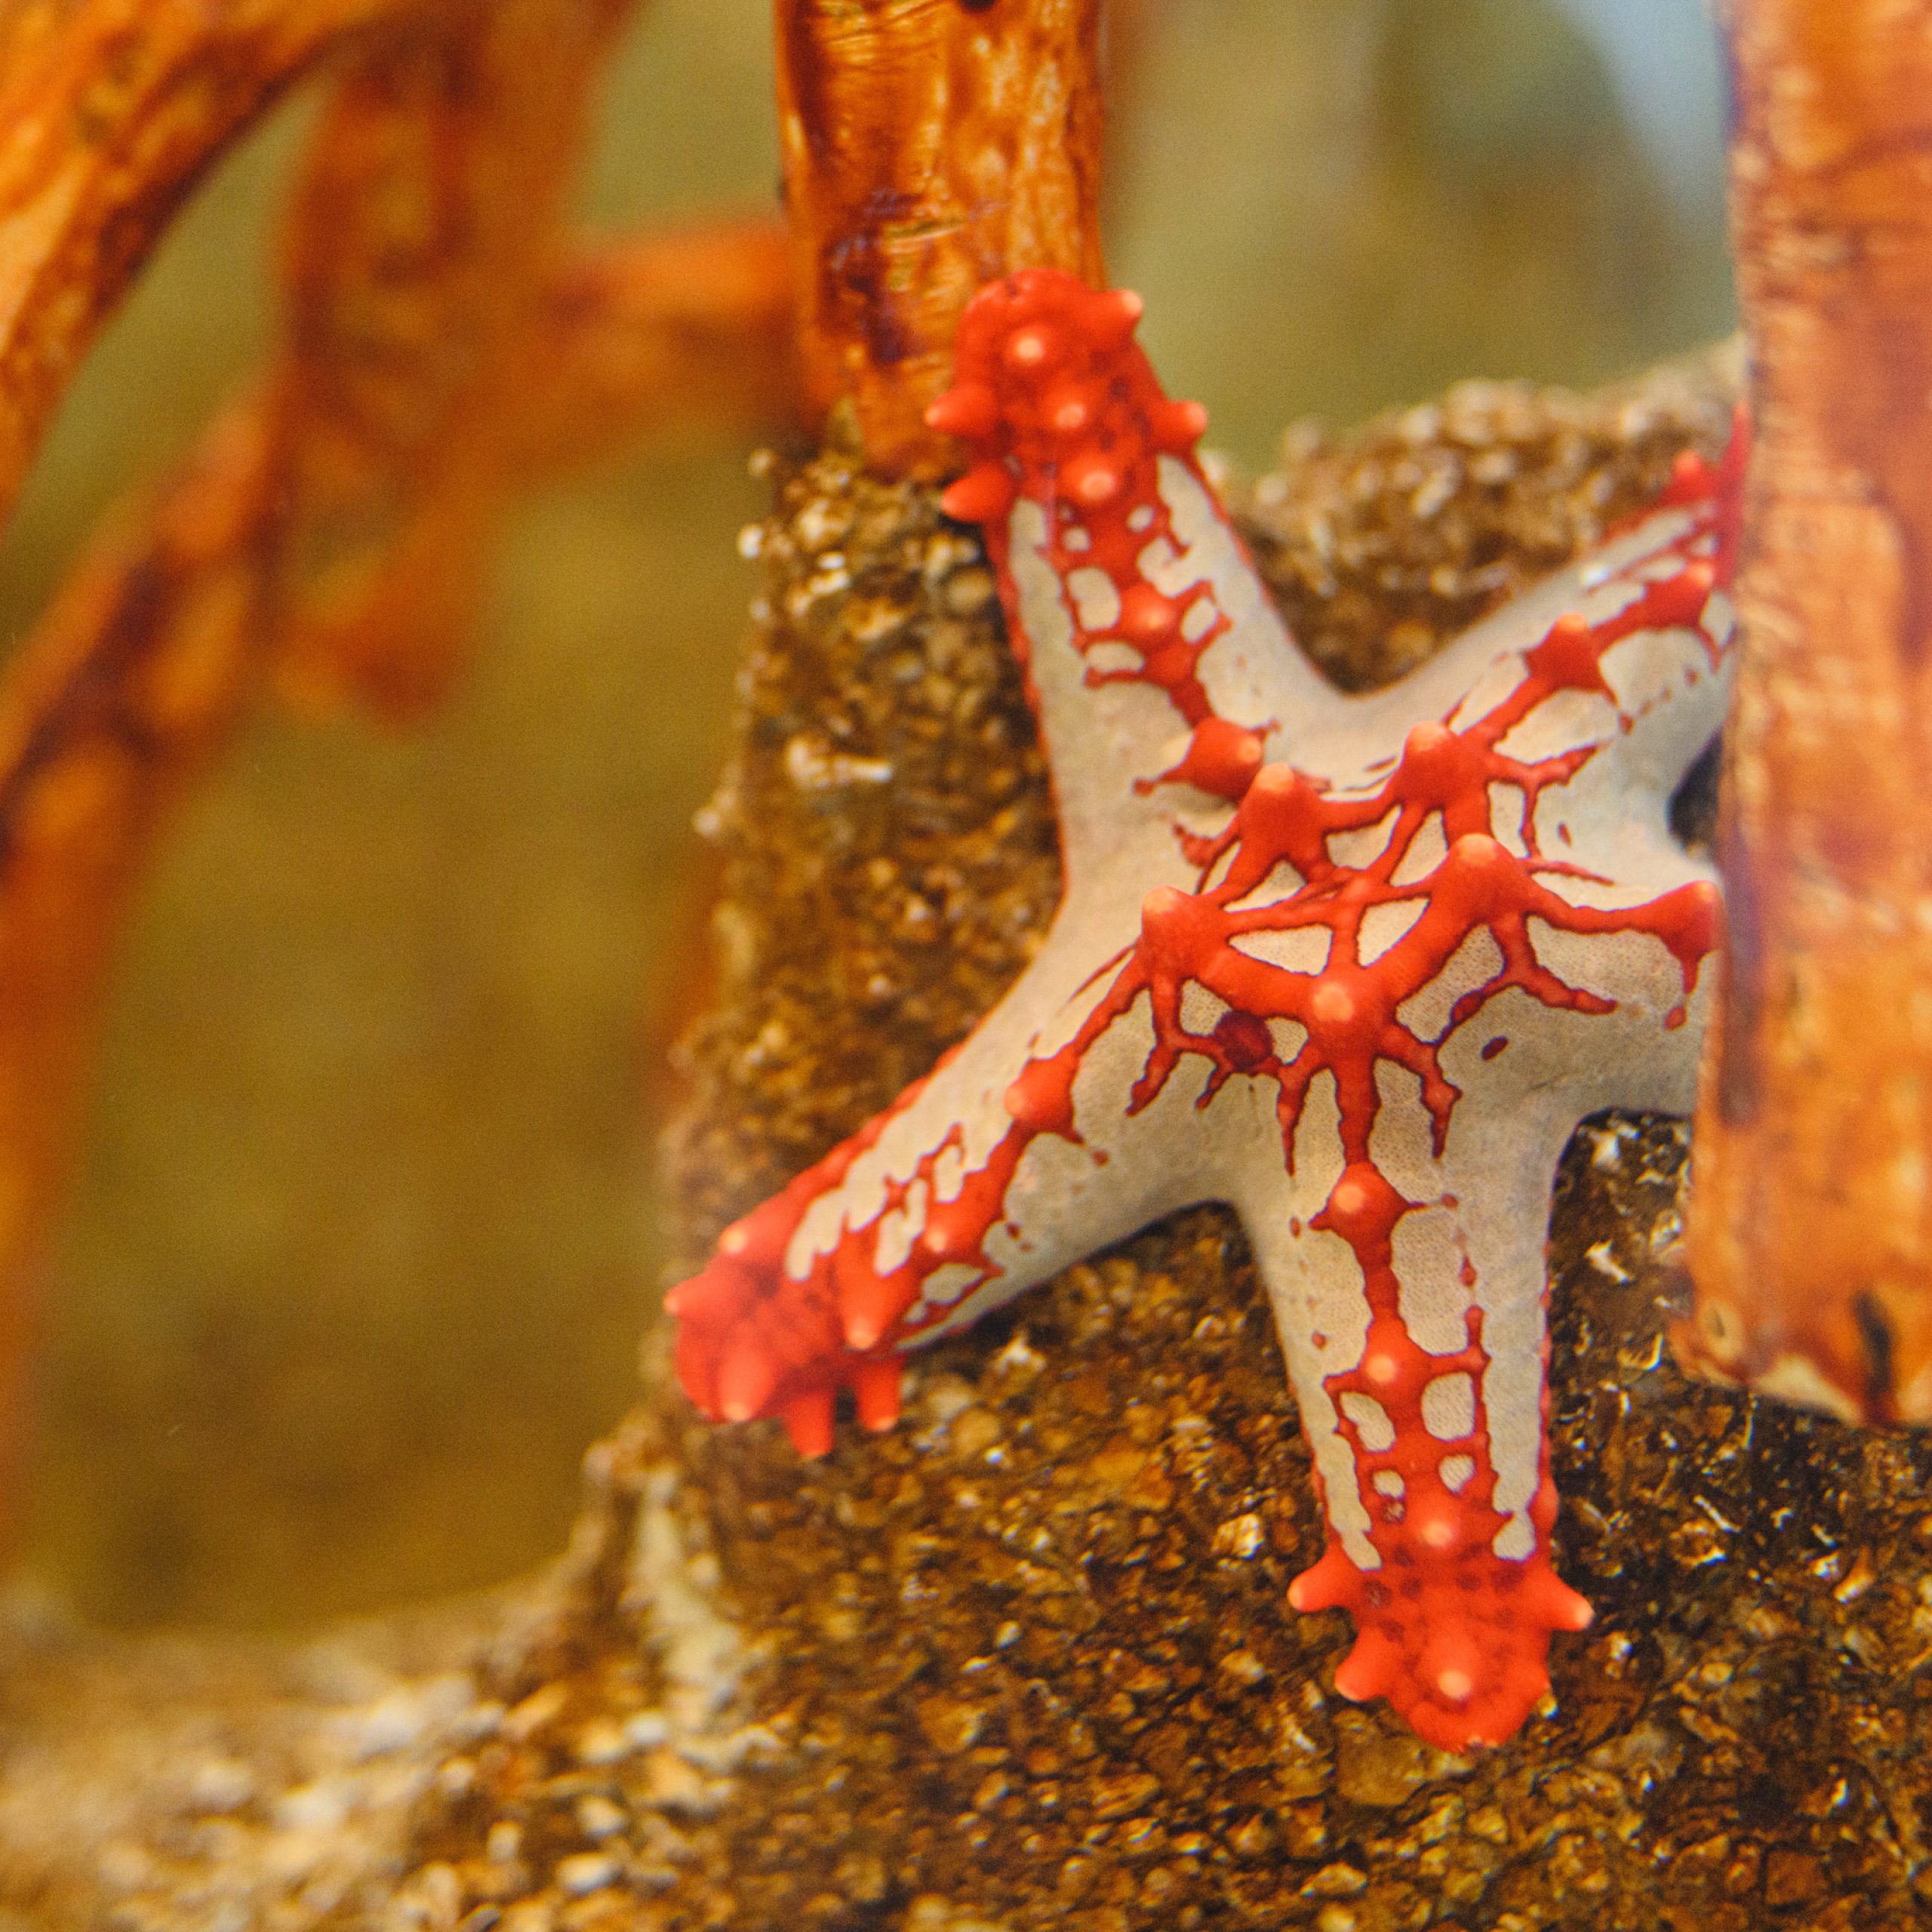 A picture of the starfish in the aquarium